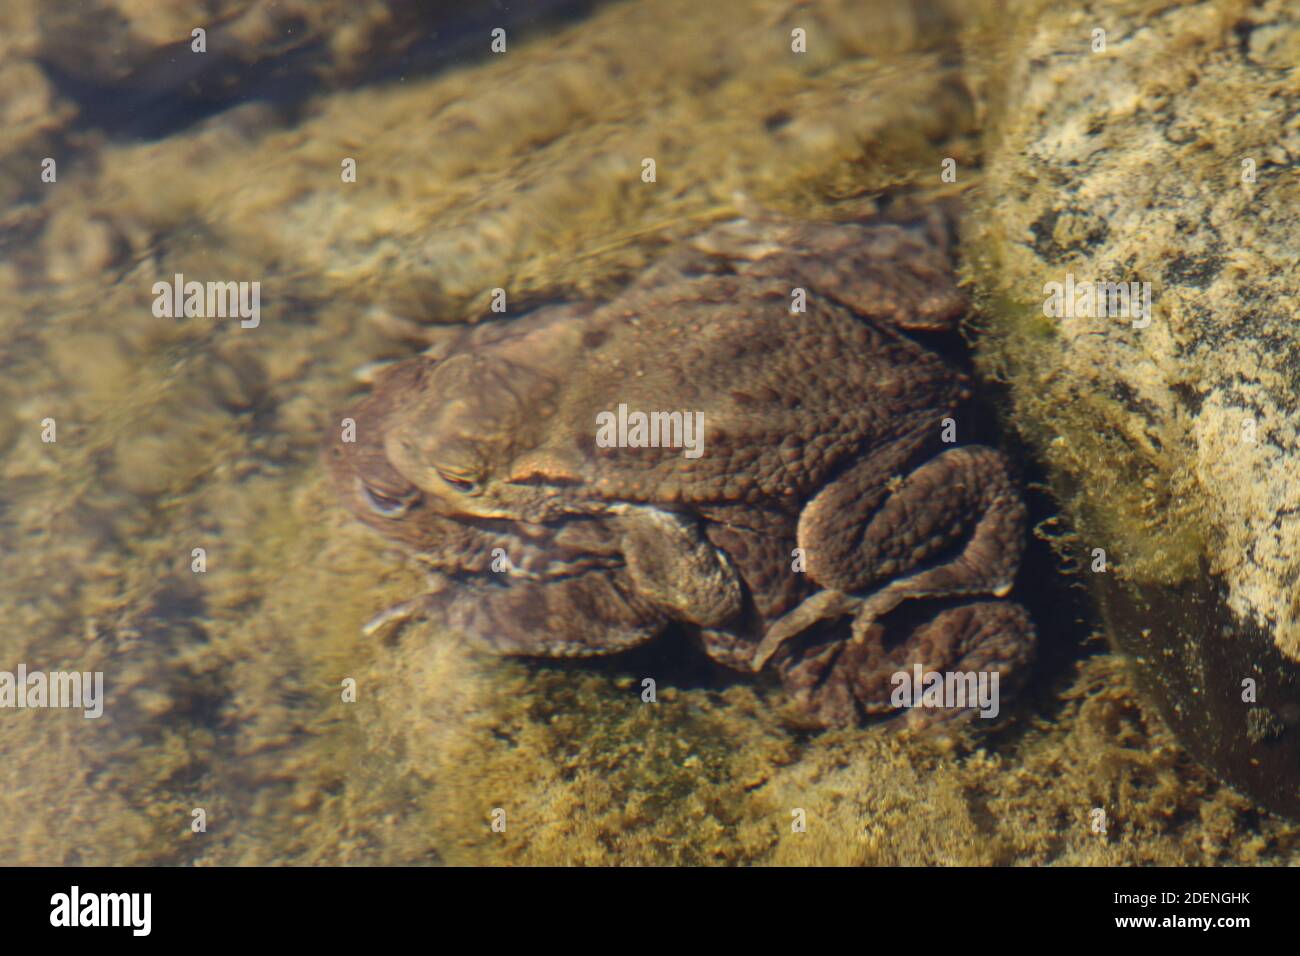 Bufo bufo, Common Toads matting, posture, with small male locked onto female, these british amphibians are breeding in a slow flowing river bed. Stock Photo